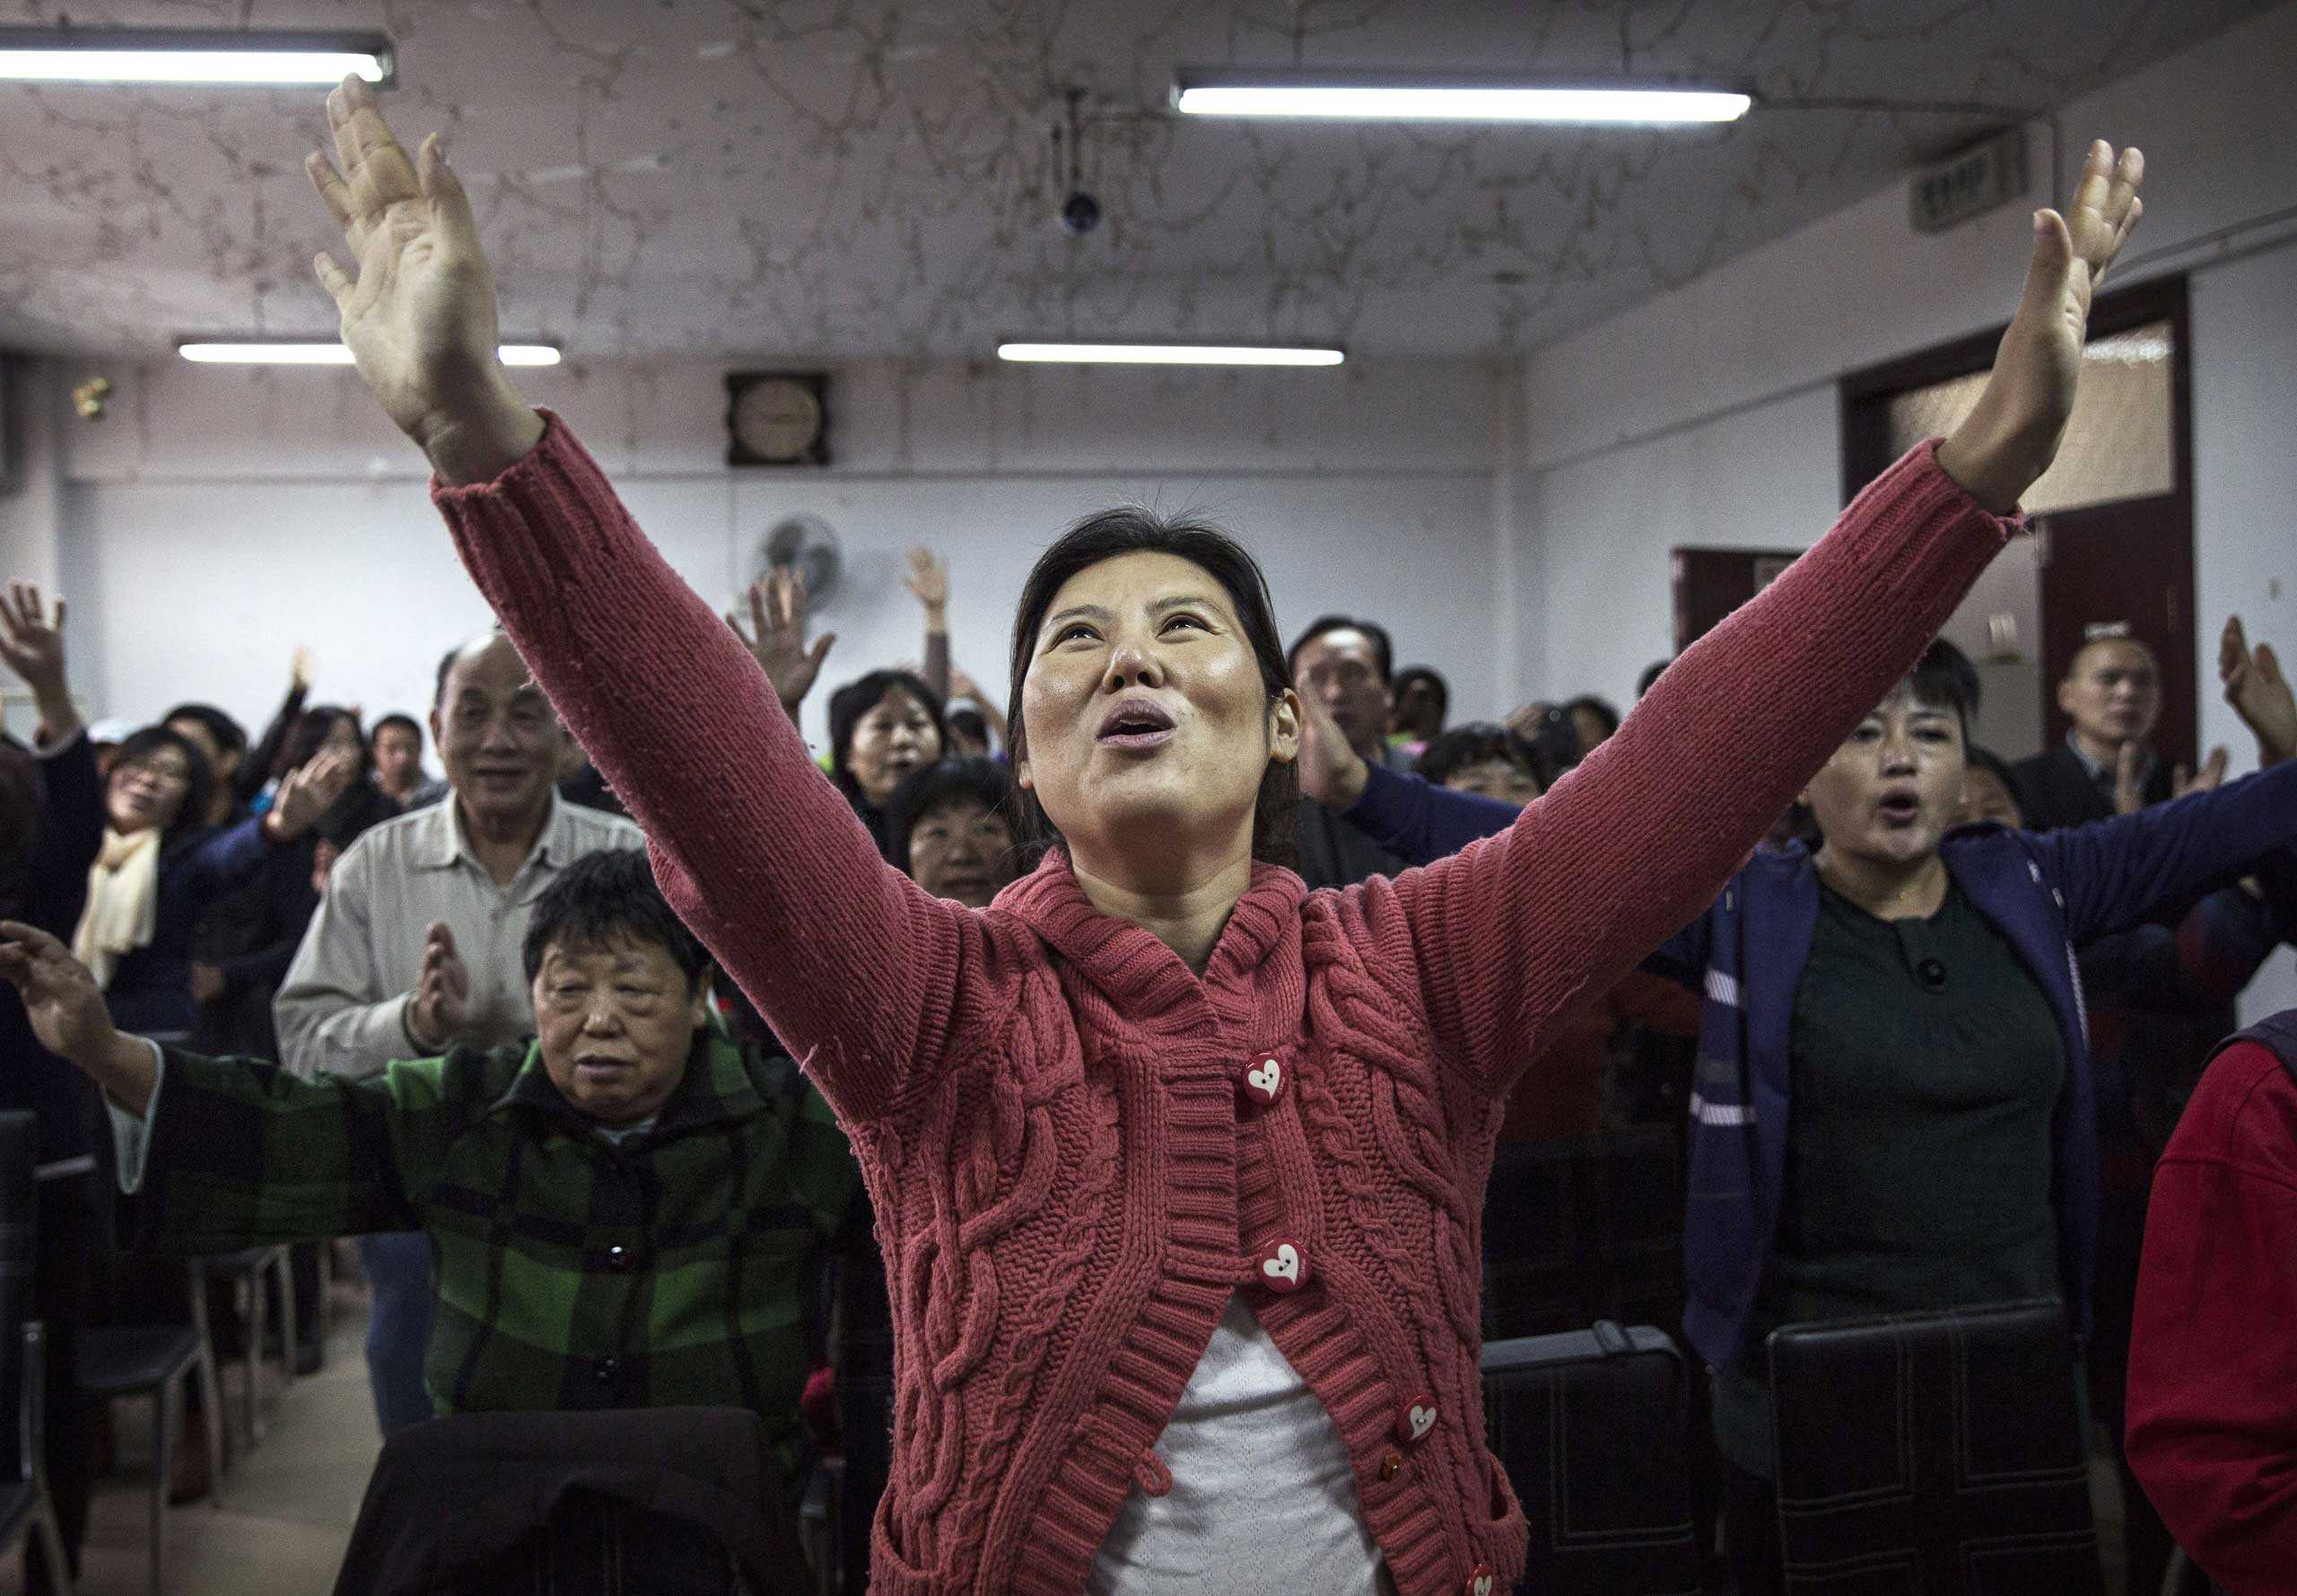 A Christian woman sings during a prayer service.